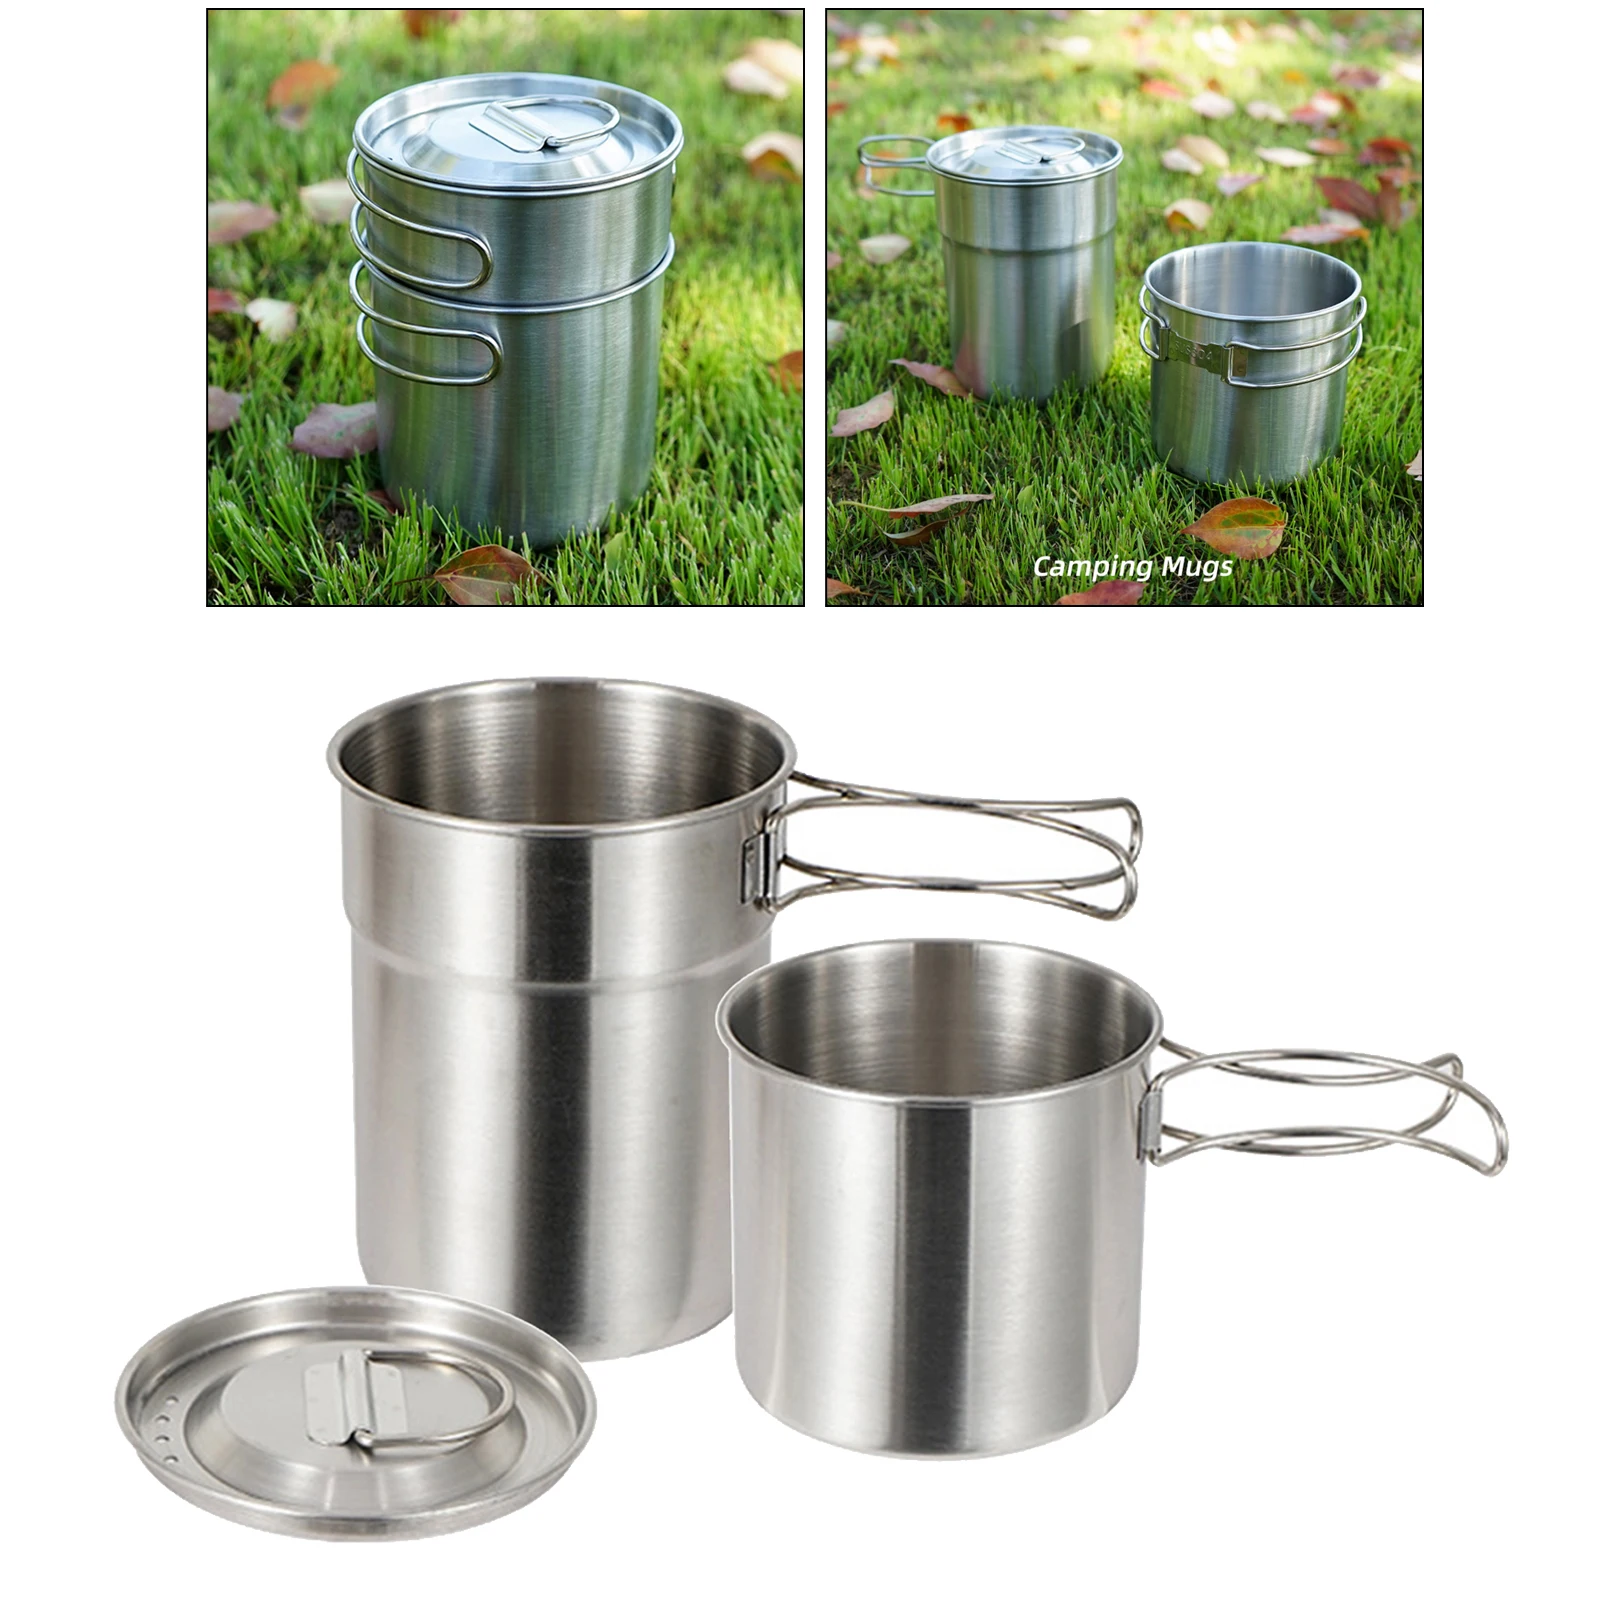 700ml Outdoor Stainless Steel Cup Mug Pots Tableware Camping Cup Picnic 